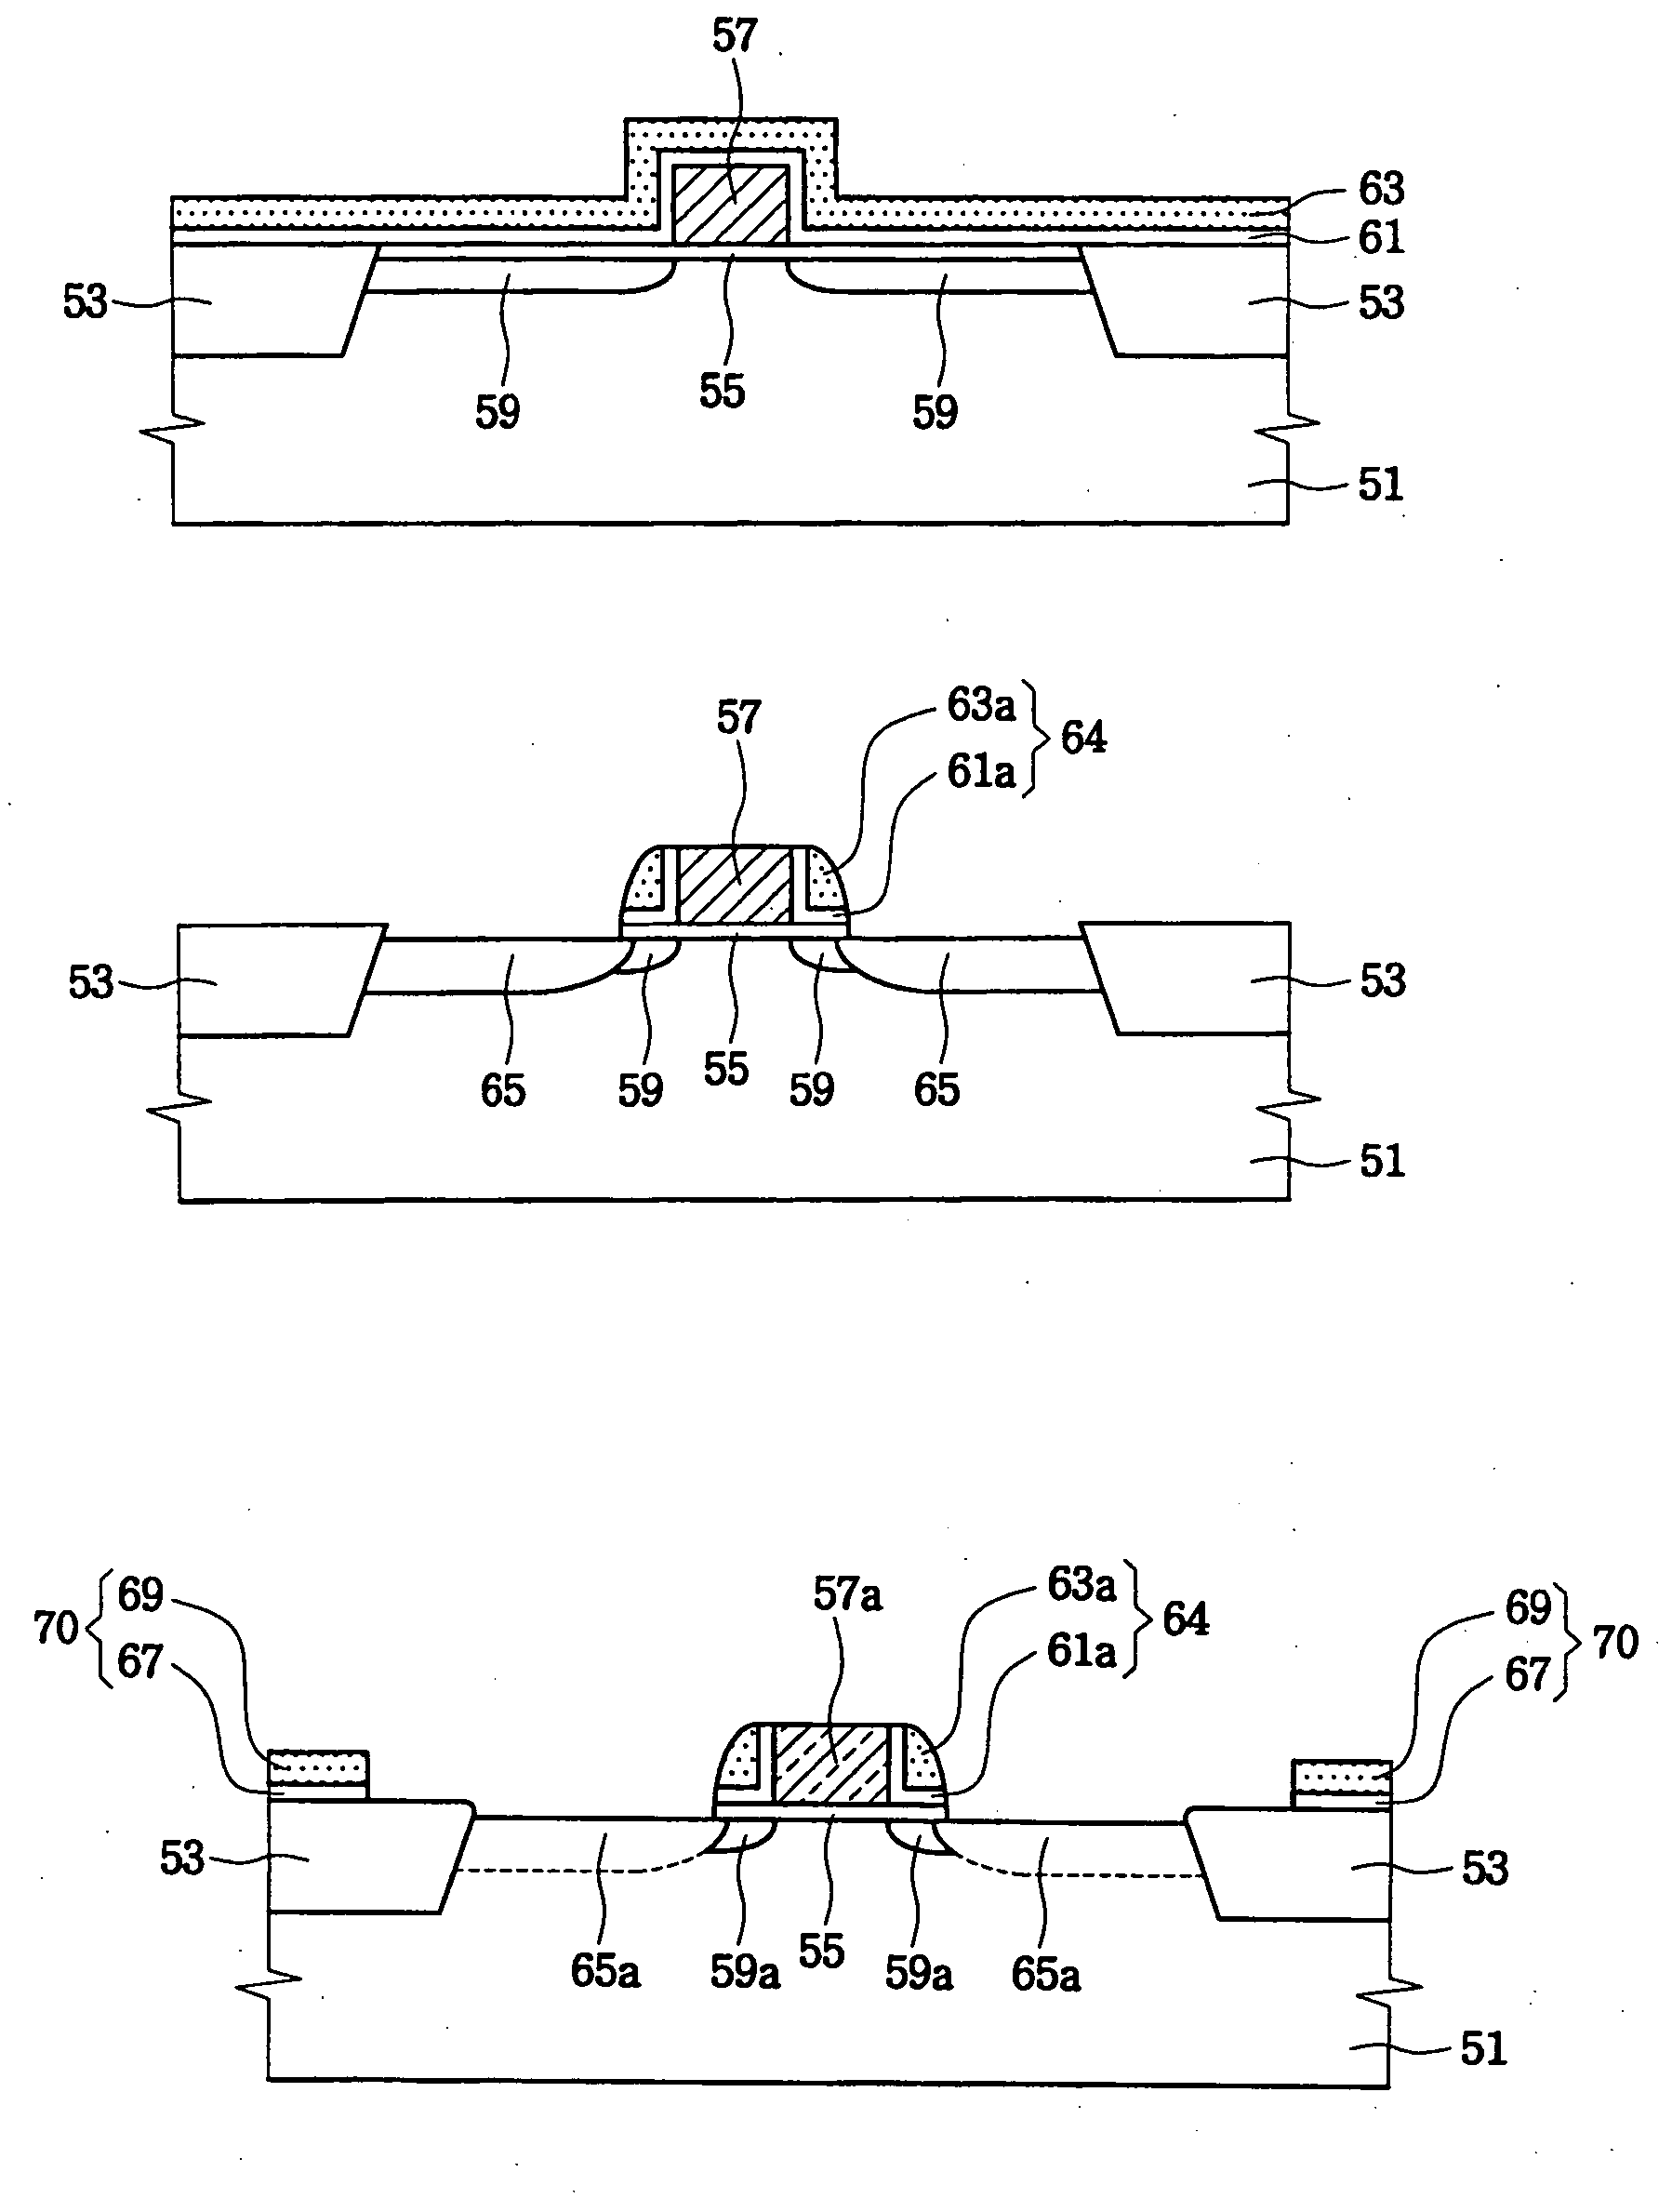 Nickel salicide process with reduced dopant deactivation